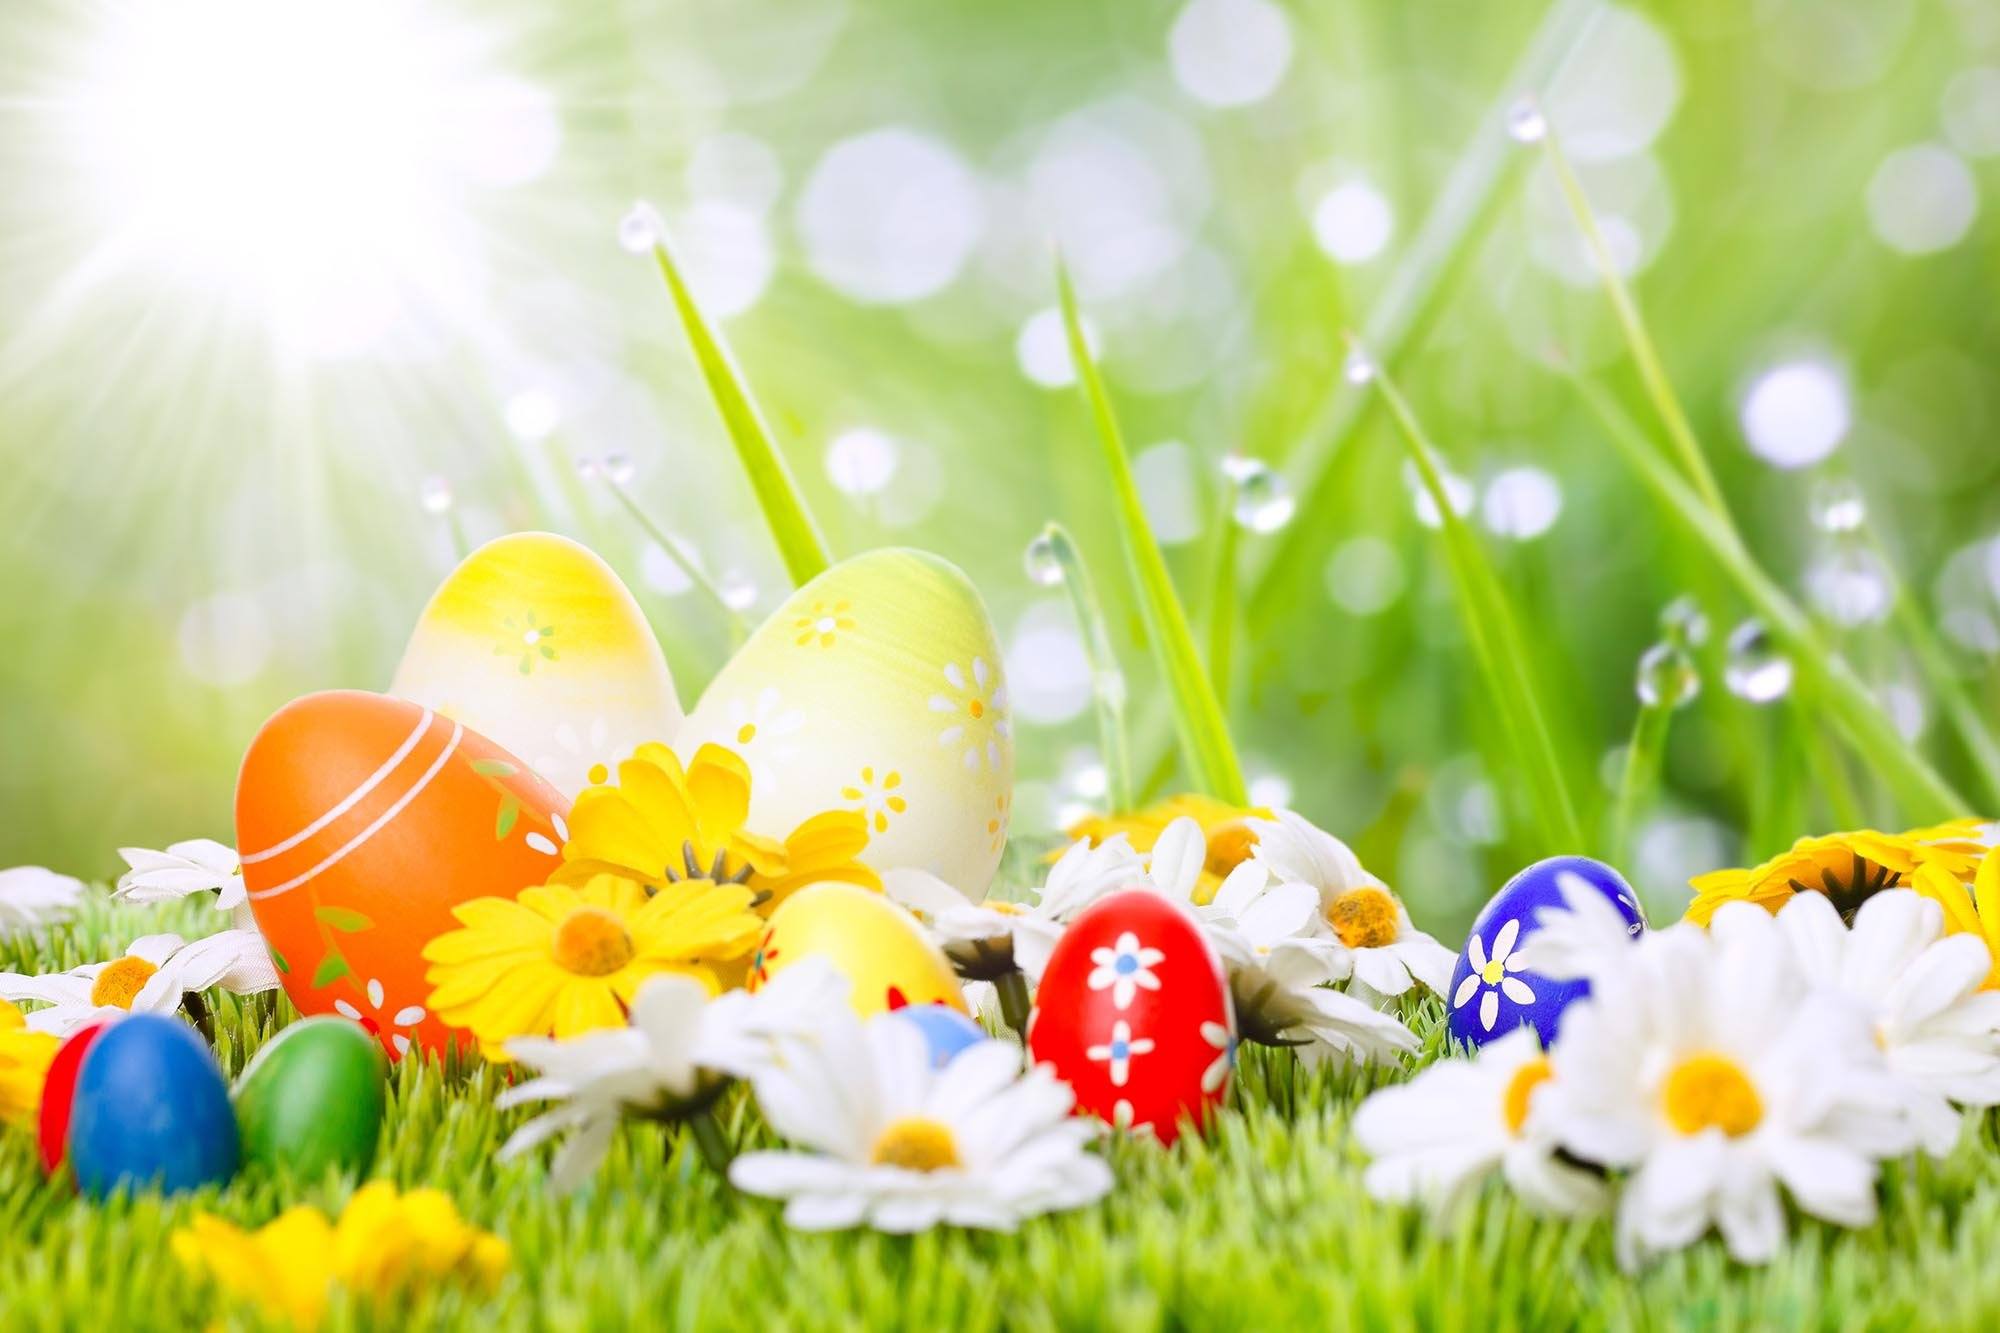 Easter Colorful Eggs And Flowers On Grass With Sunshine For Holiday Photography Backdrop Shopbackdrop